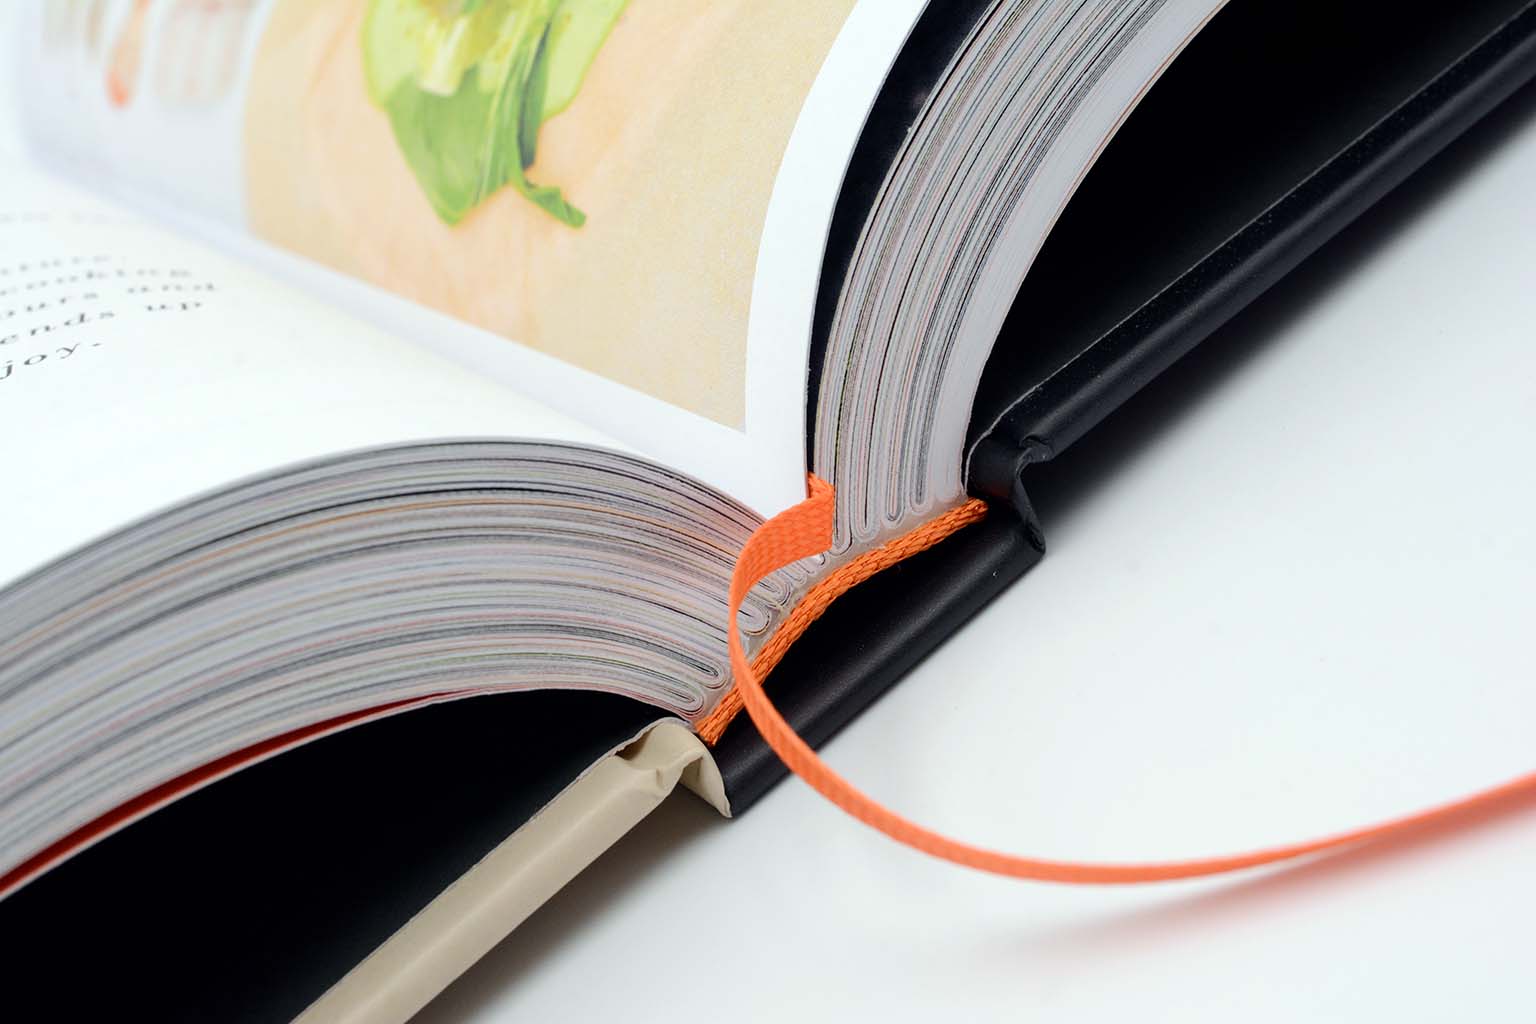 Hardcover book with square spine